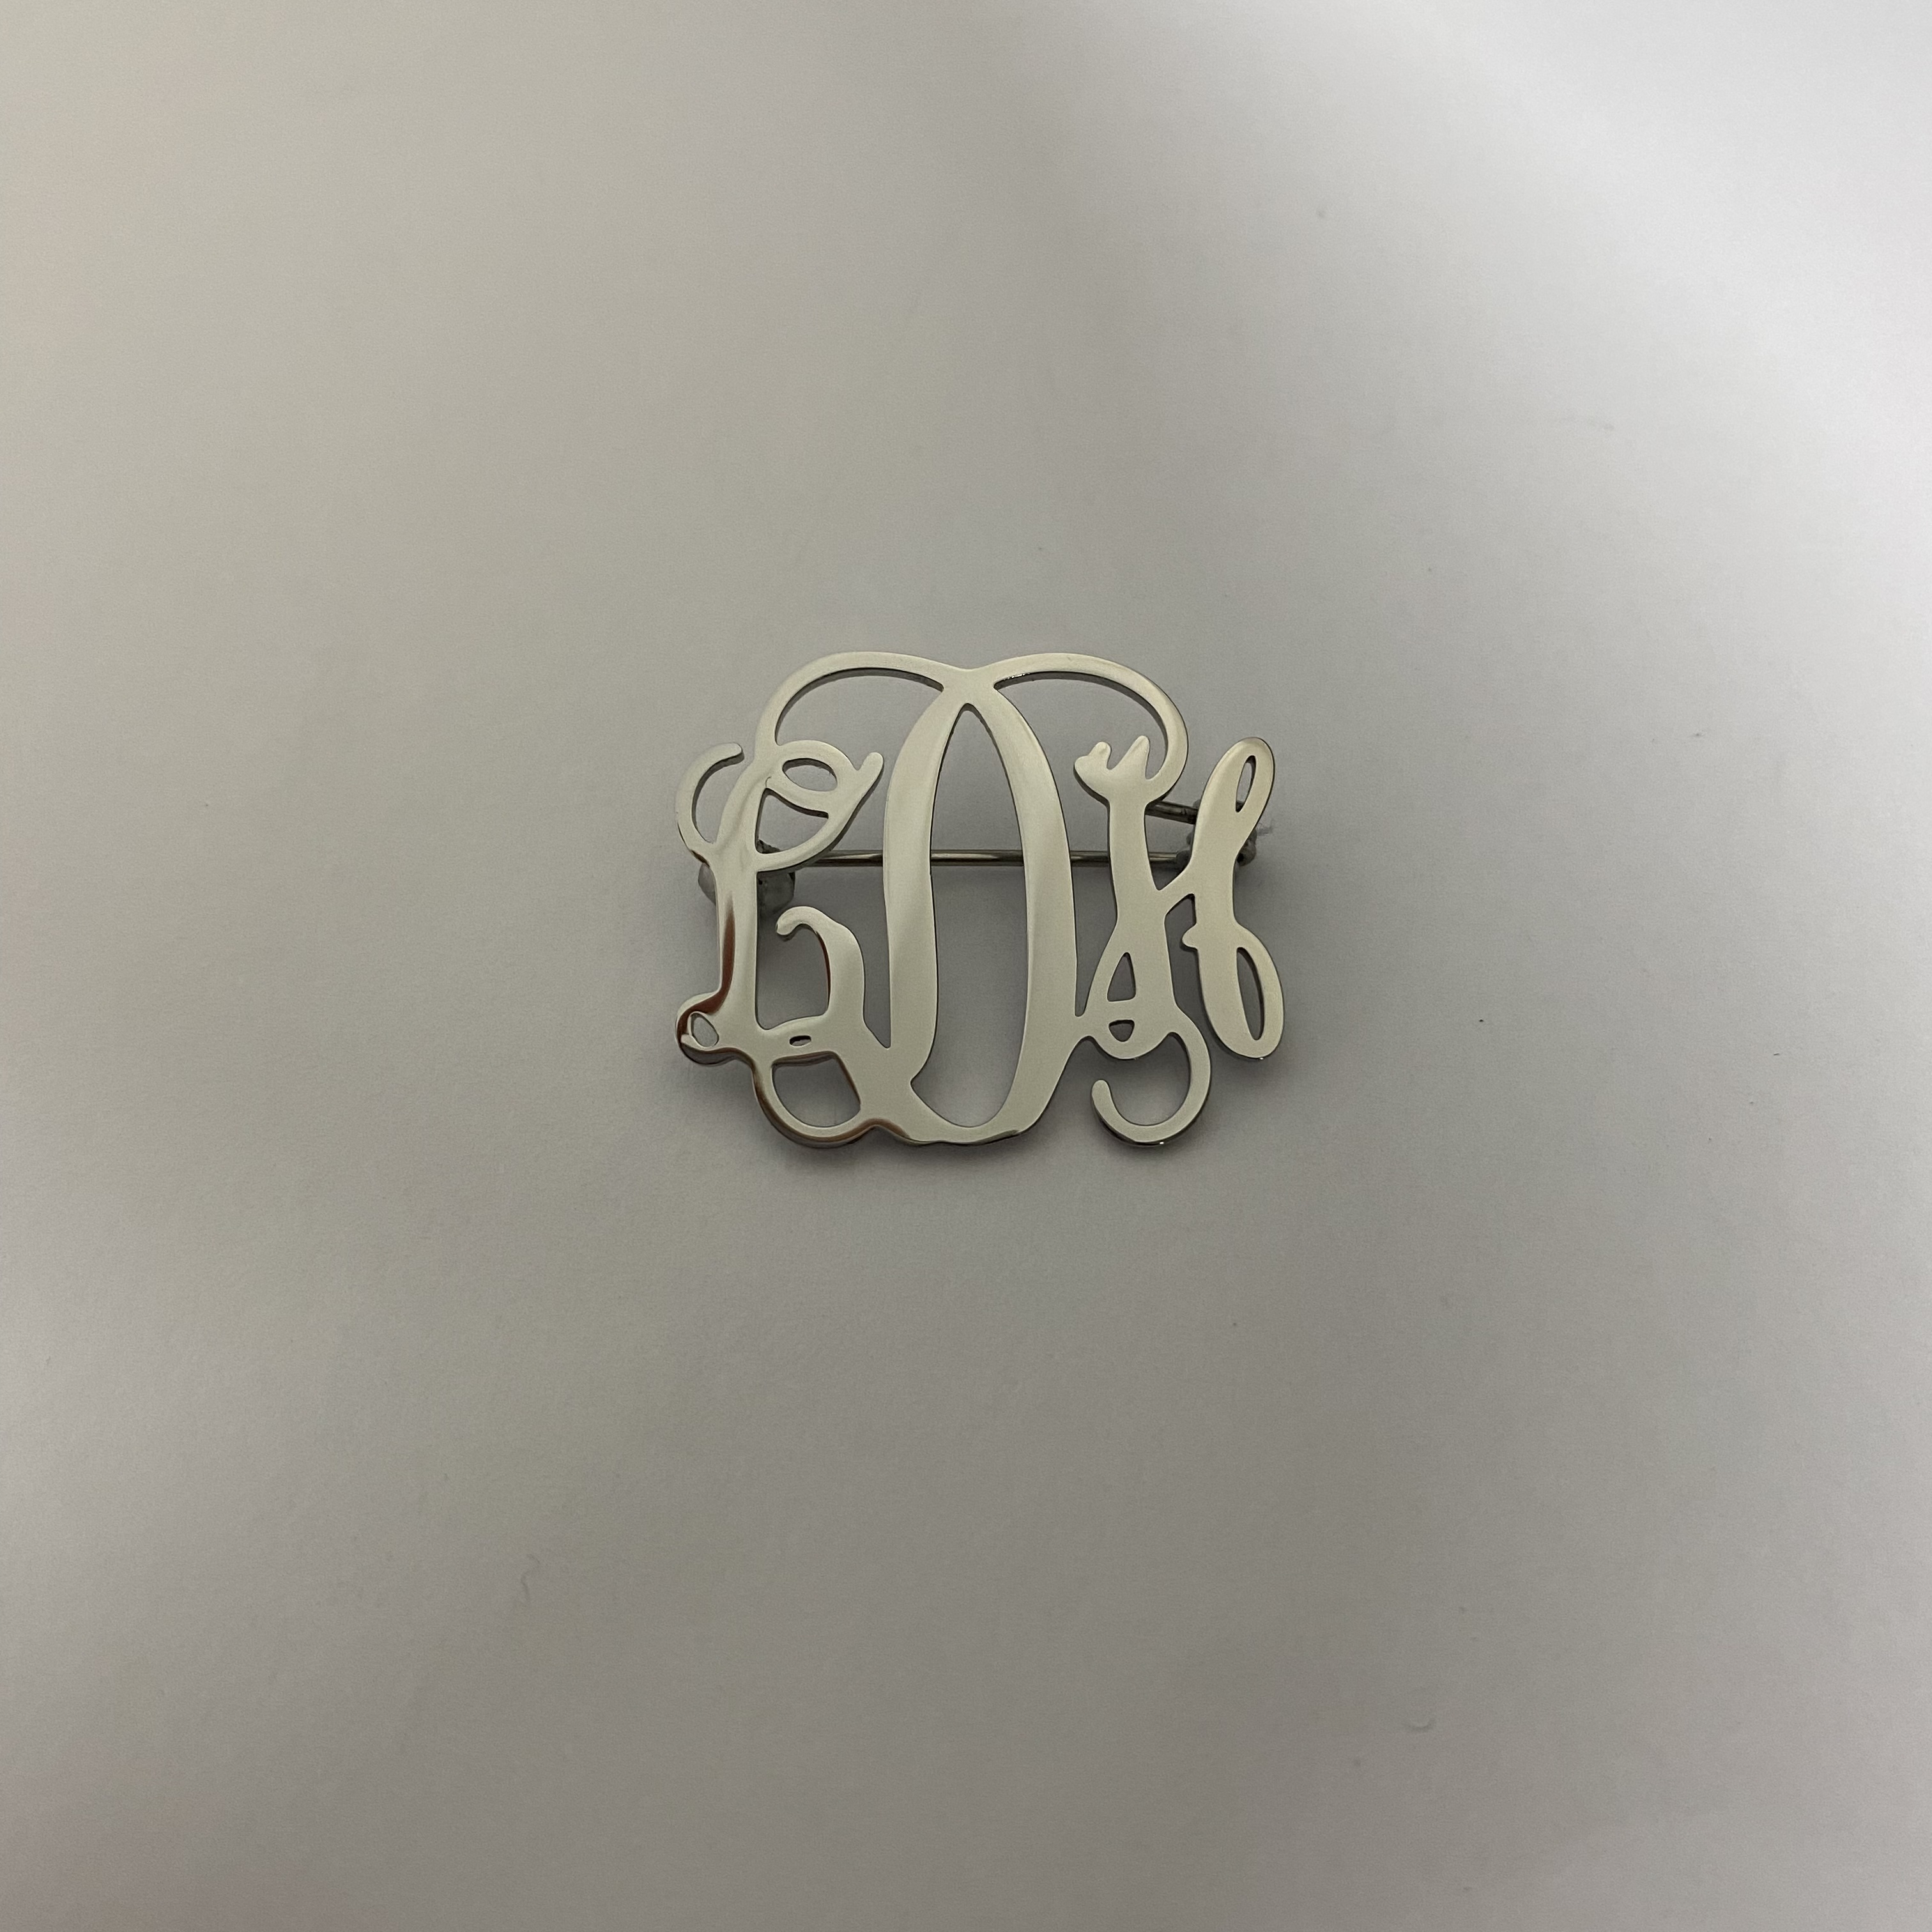 Personalized Initial Name Lapel Pin Monogram Stainless Steel